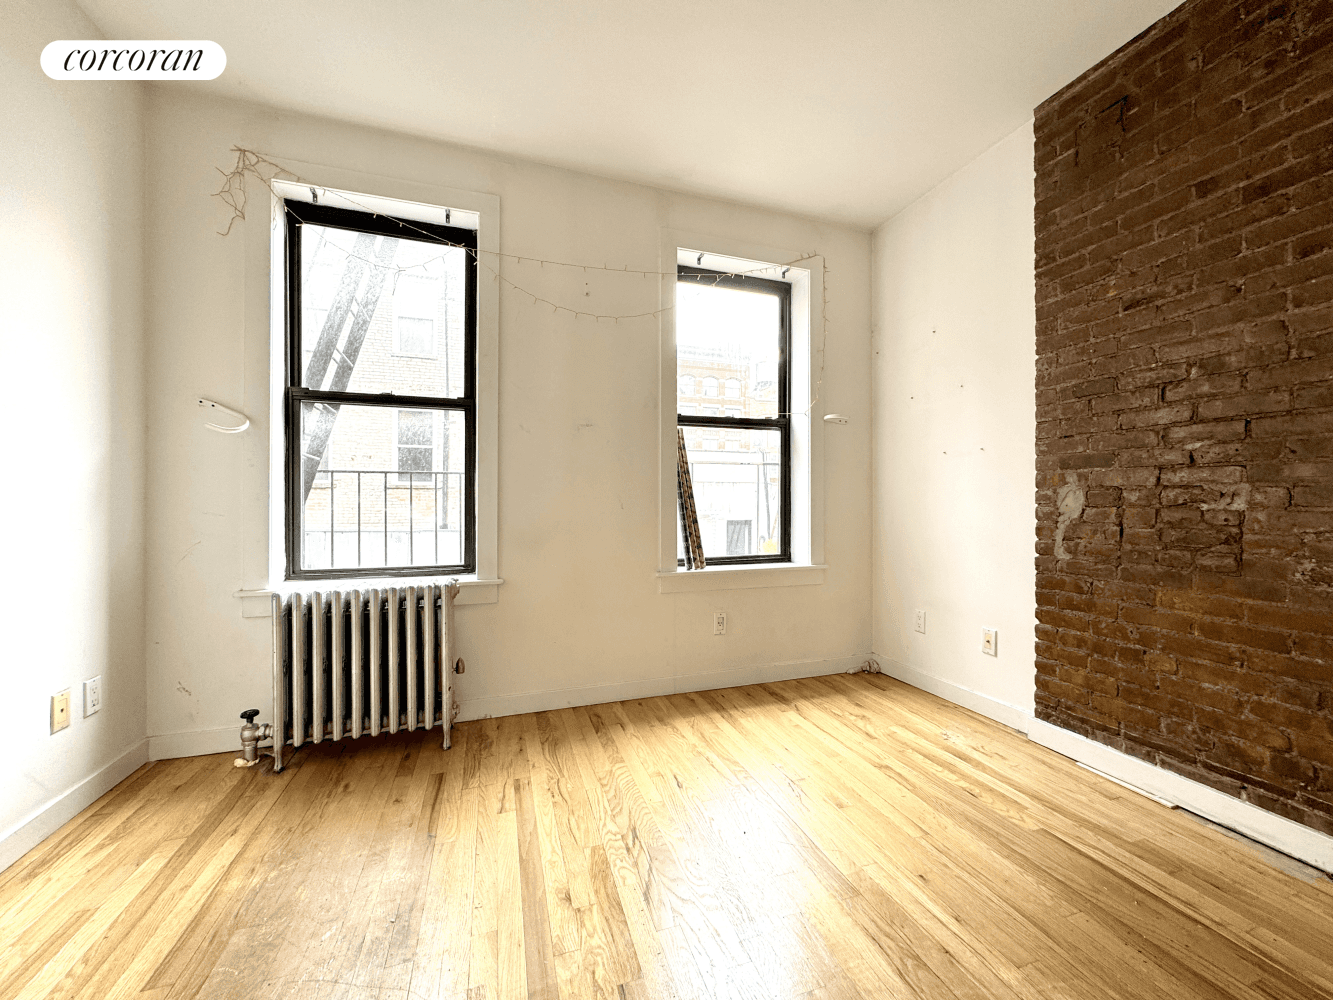 Available 6 1. Modern 1 bedroom in prime Soho location just around the corner from some of NYC's best shopping and dining !